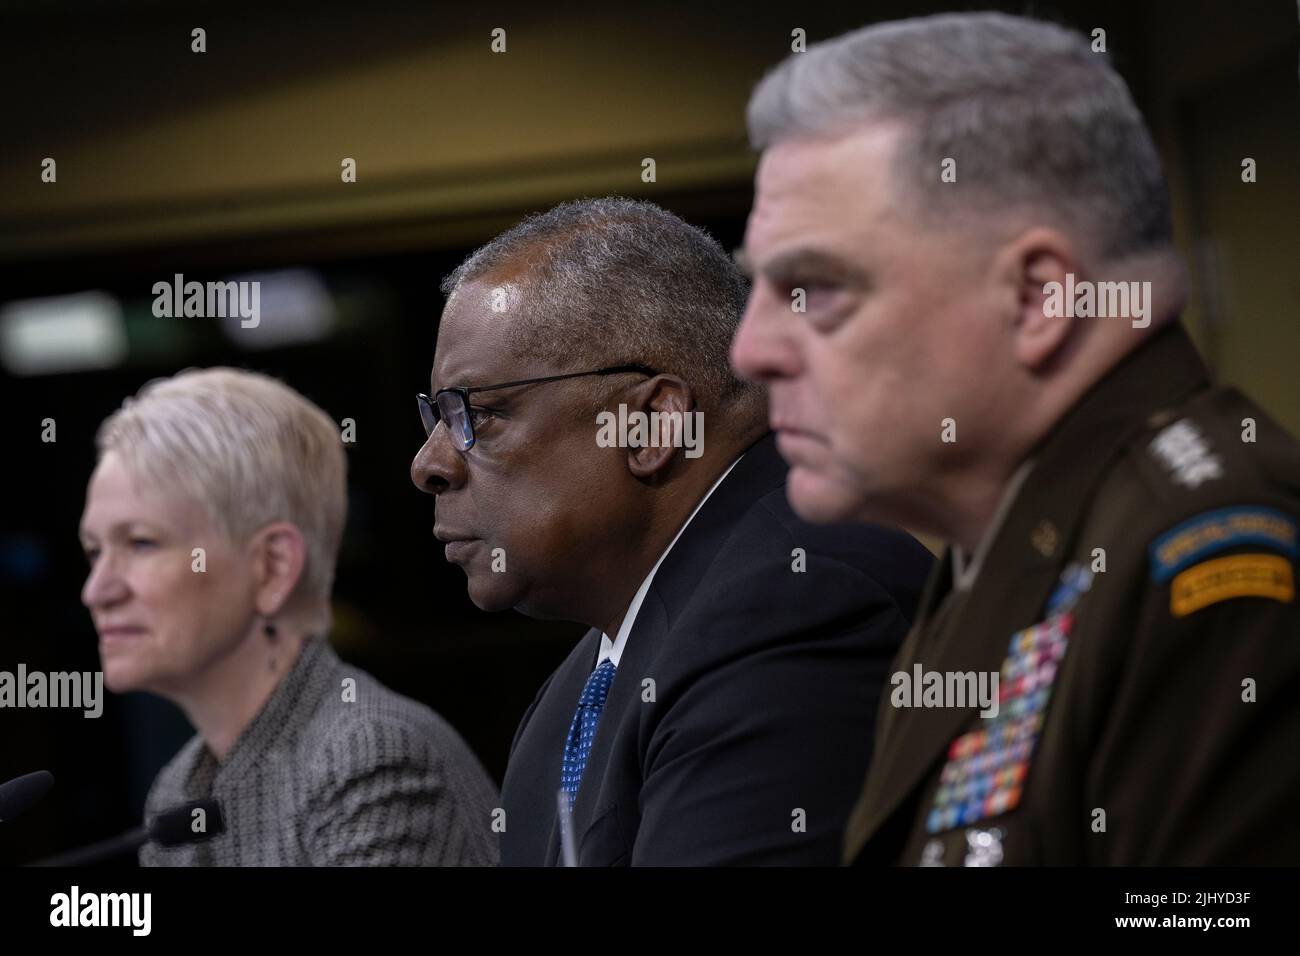 Arlington, United States Of America. 20th July, 2022. Arlington, United States of America. 20 July, 2022. U.S. Secretary of Defense Lloyd Austin, center, alongside Chairman of the Joint Chiefs of Staff, Gen. Mark A. Milley, right, and Celeste Wallander, Assistant Secretary of Defense for International Security Affairs, left, during a virtual meeting of the Ukraine Defense Contact Group from the Pentagon, July 20, 2022 in Arlington, Virginia. Credit: Chad J. McNeeley/DOD/Alamy Live News Stock Photo